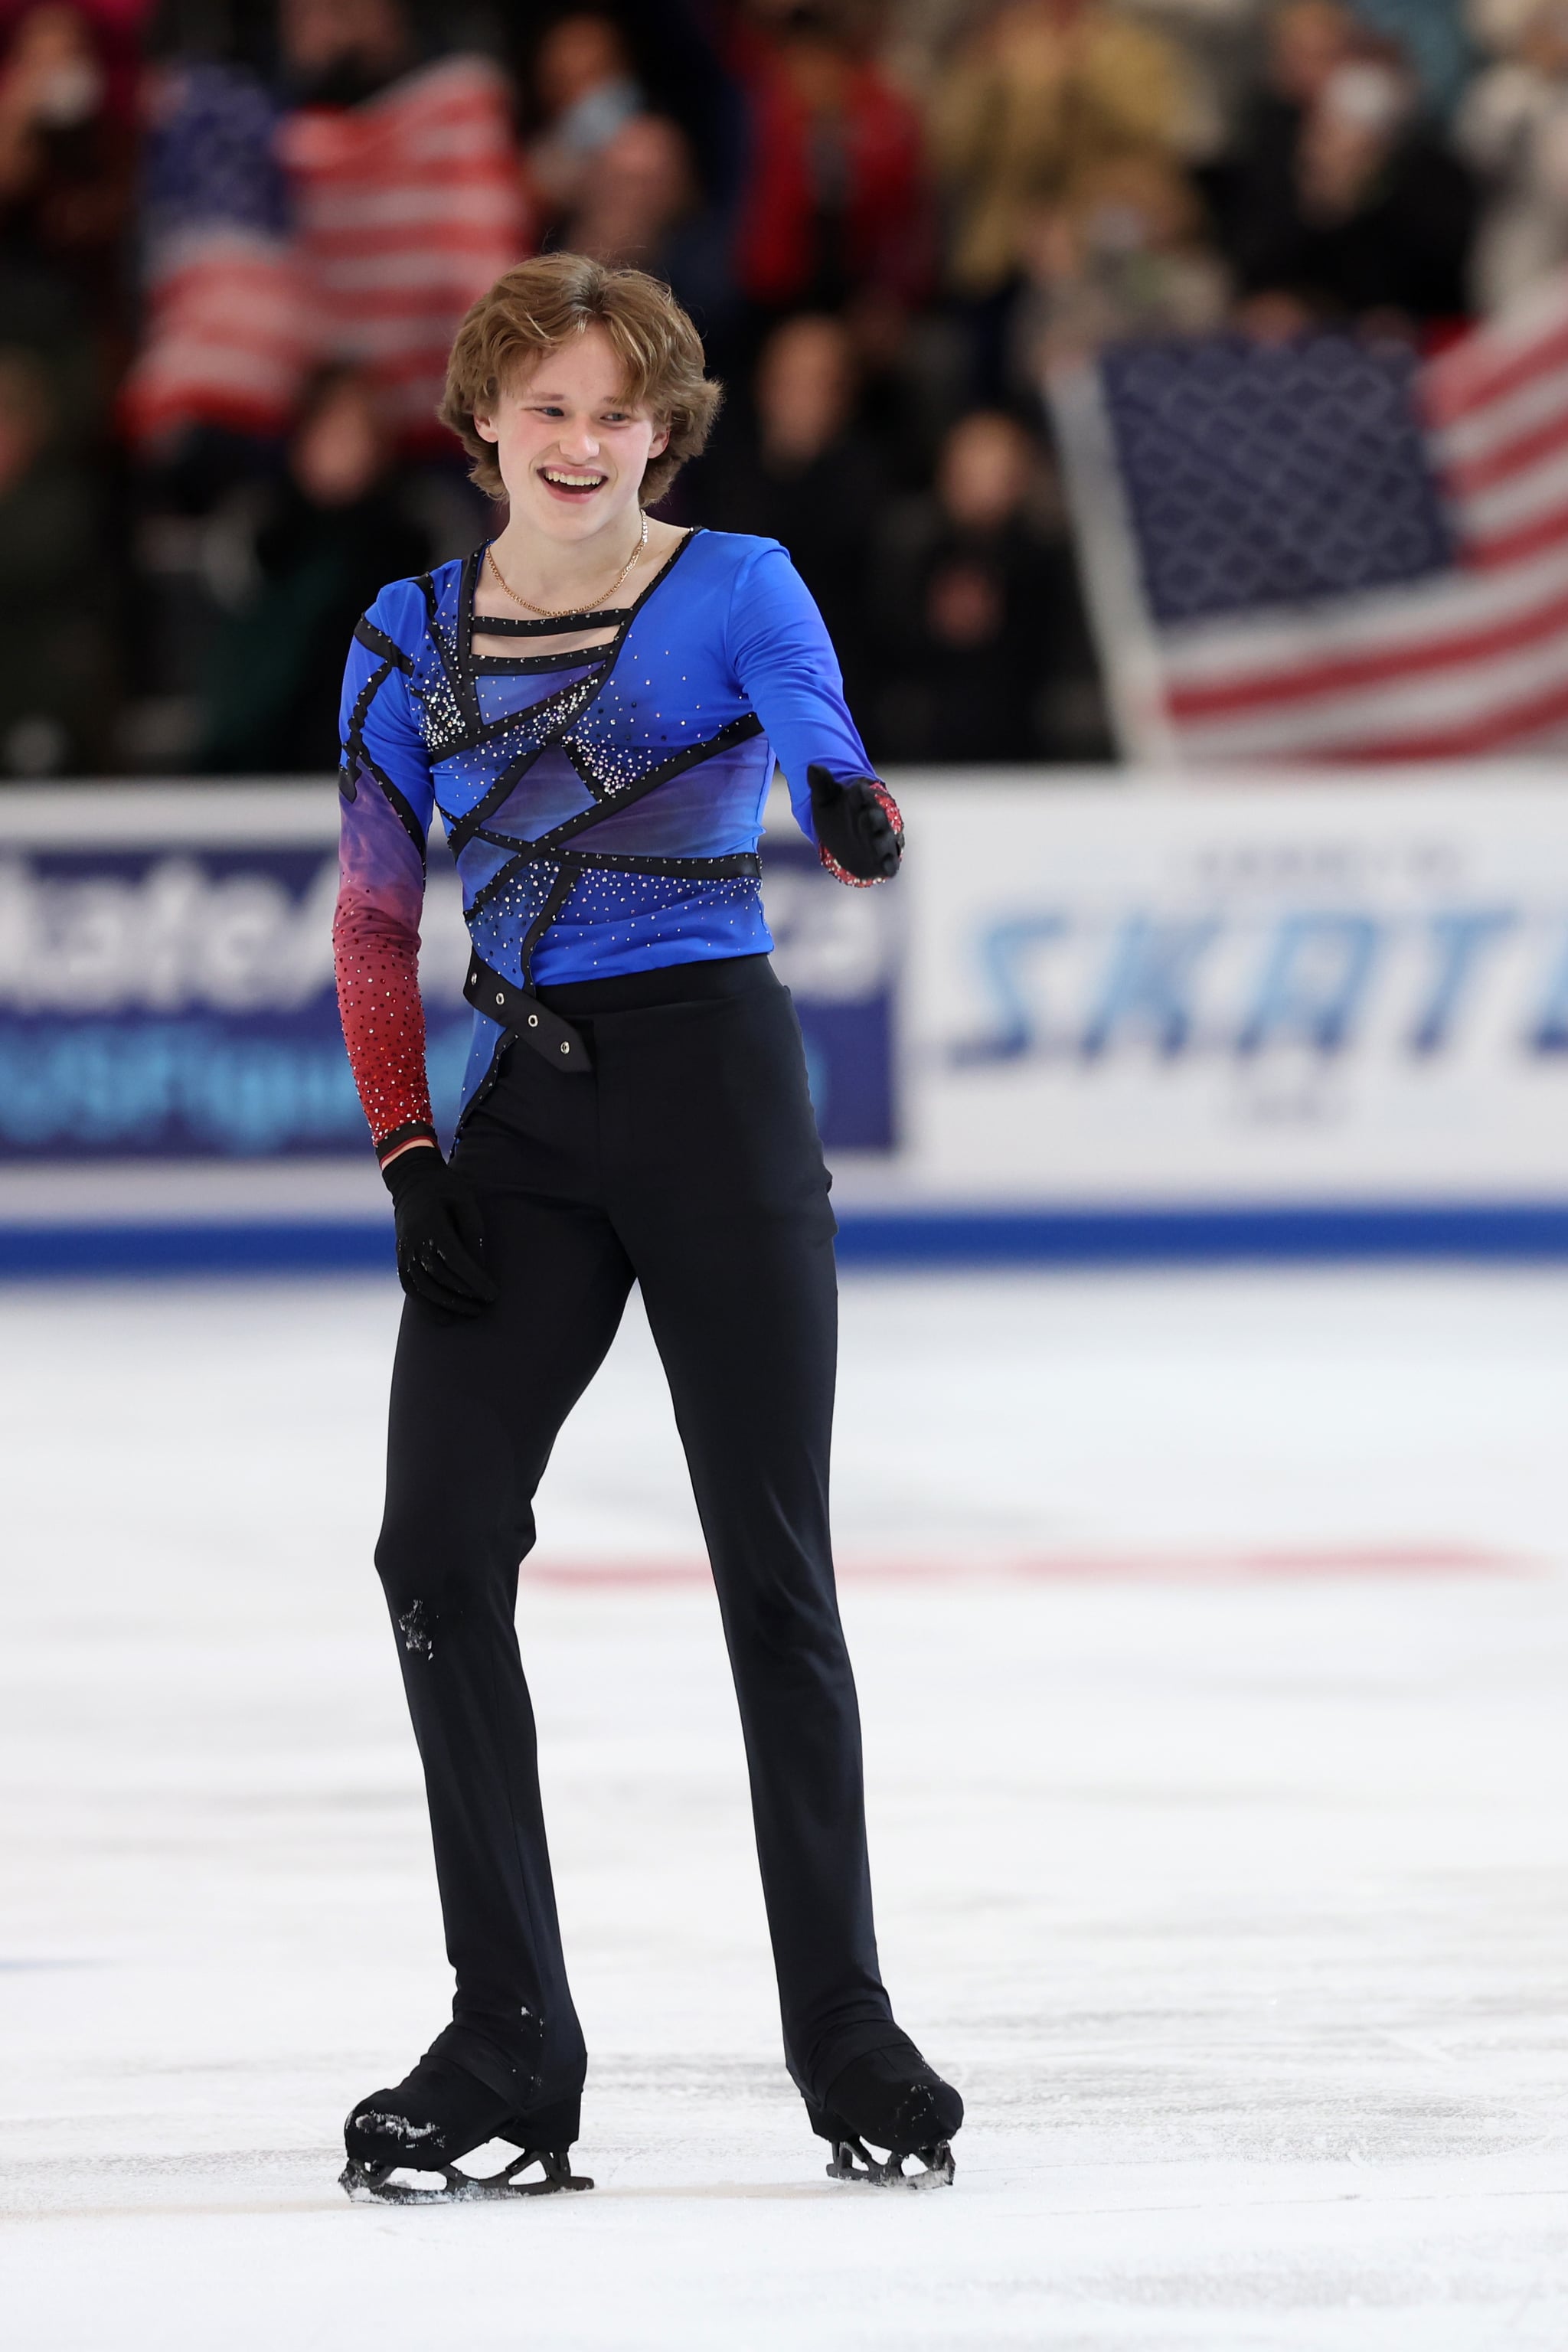 NORWOOD, MASSACHUSETTS - OCTOBER 22: Ilia Malinin of the United States celebrates after competing in the Men's Free Skate during the ISU Grand Prix of Figure Skating - Skate America at The Skating Club of Boston on October 22, 2022 in Norwood, Massachusetts. (Photo by Maddie Meyer - International Skating Union/International Skating Union via Getty Images)